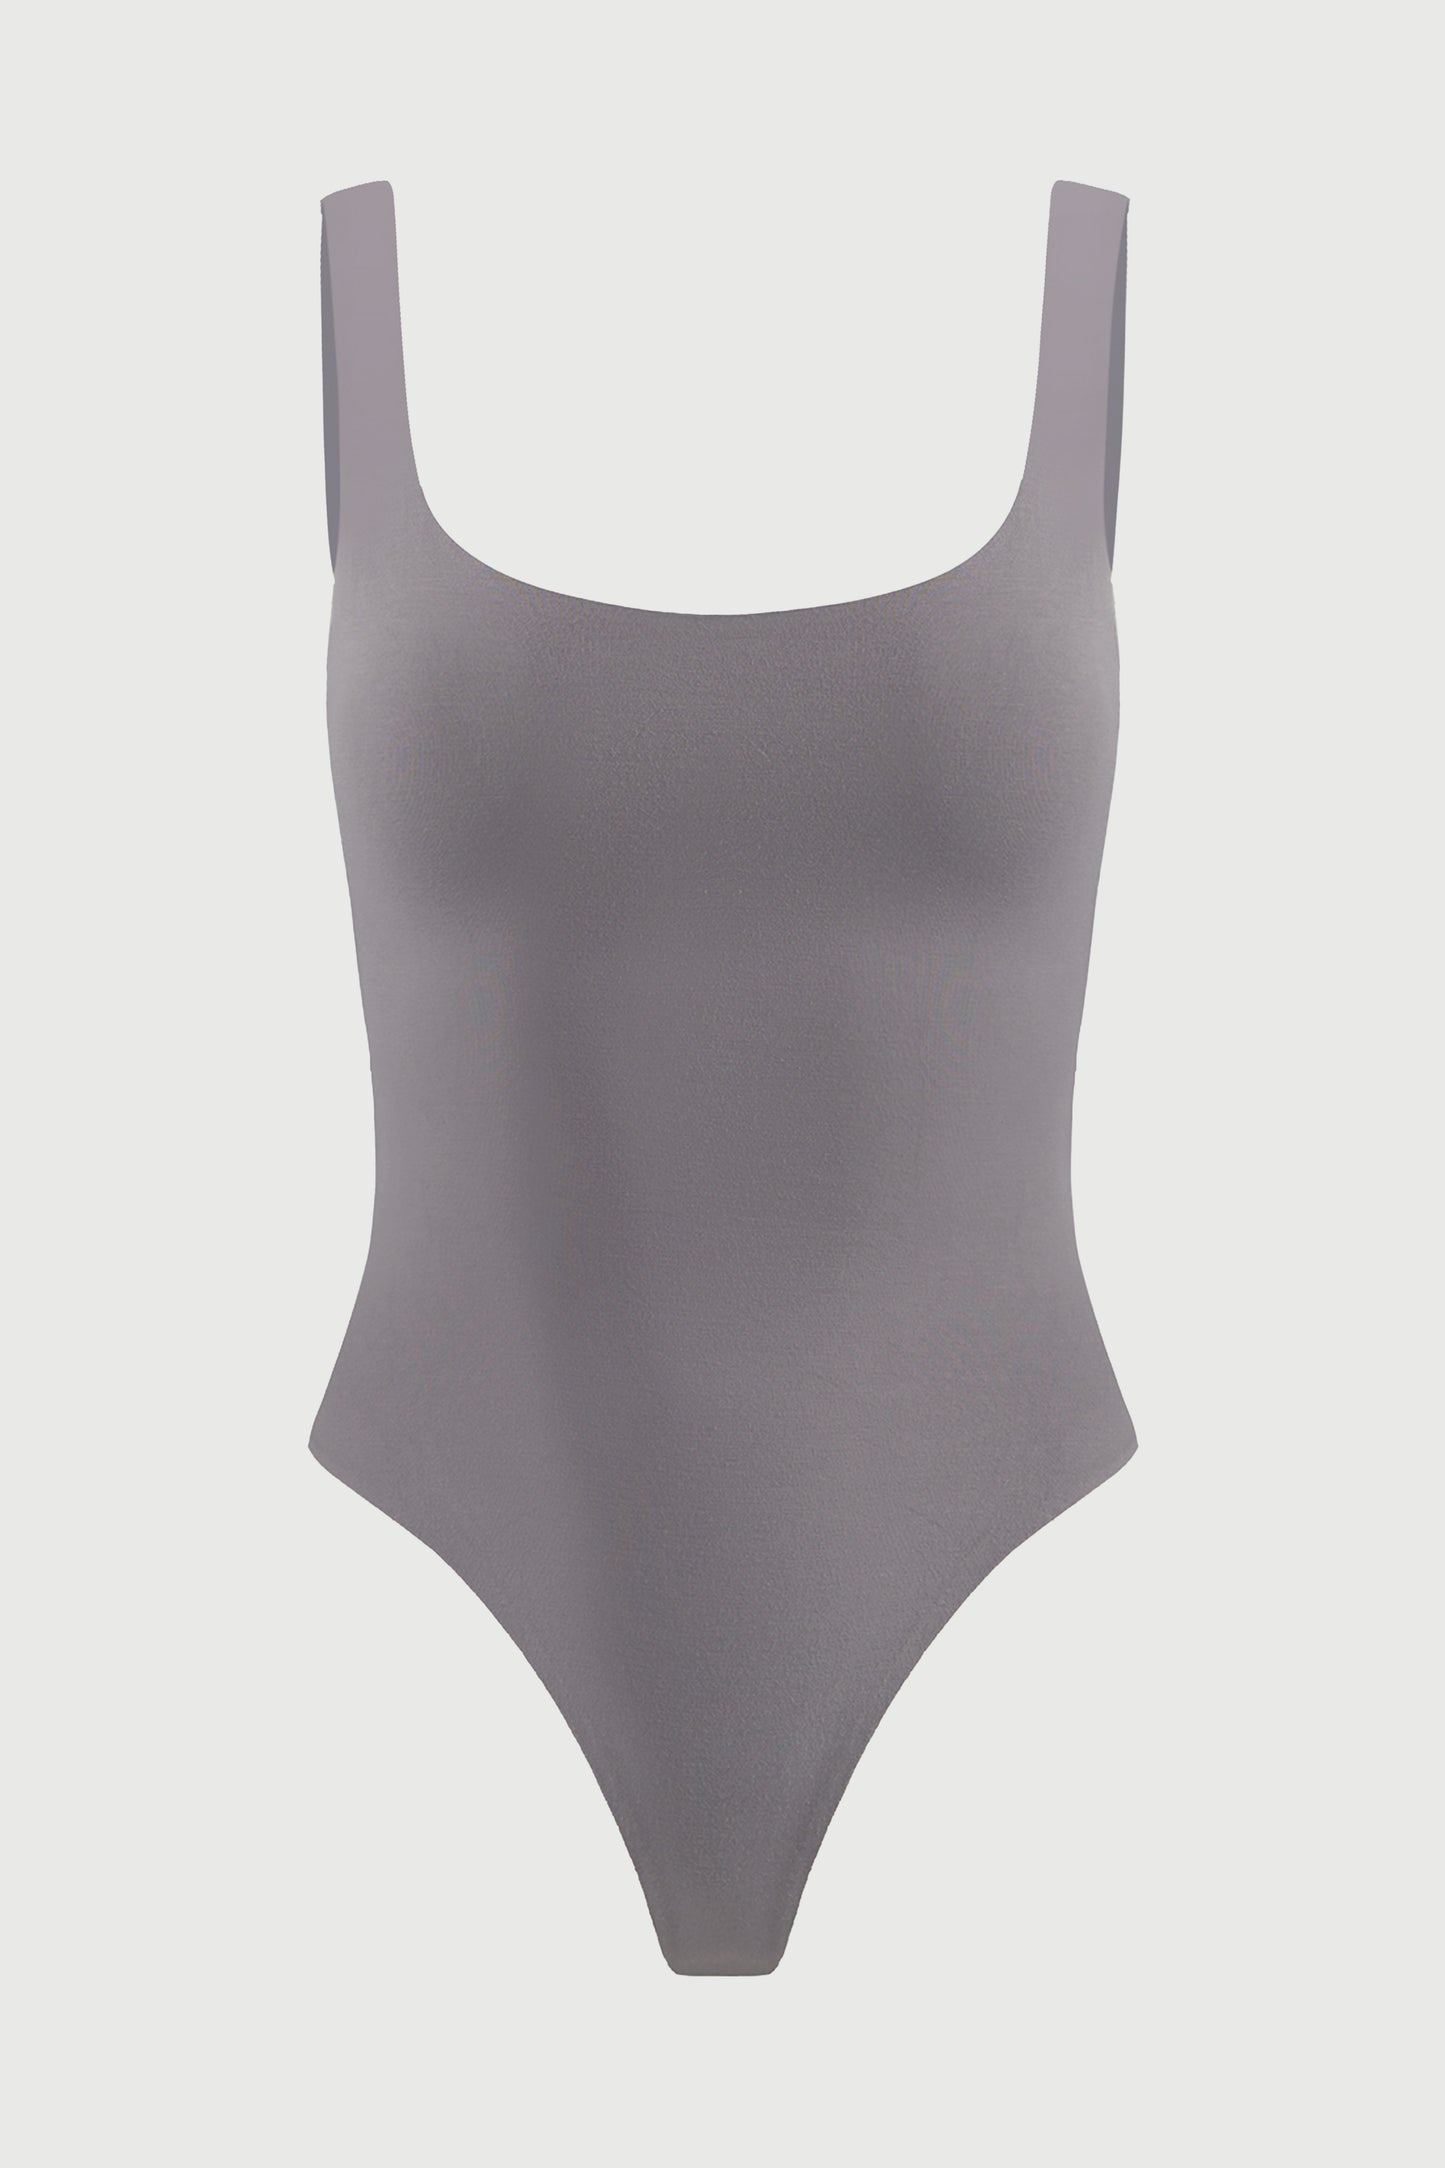 The Smooth Hourglass Bodysuit